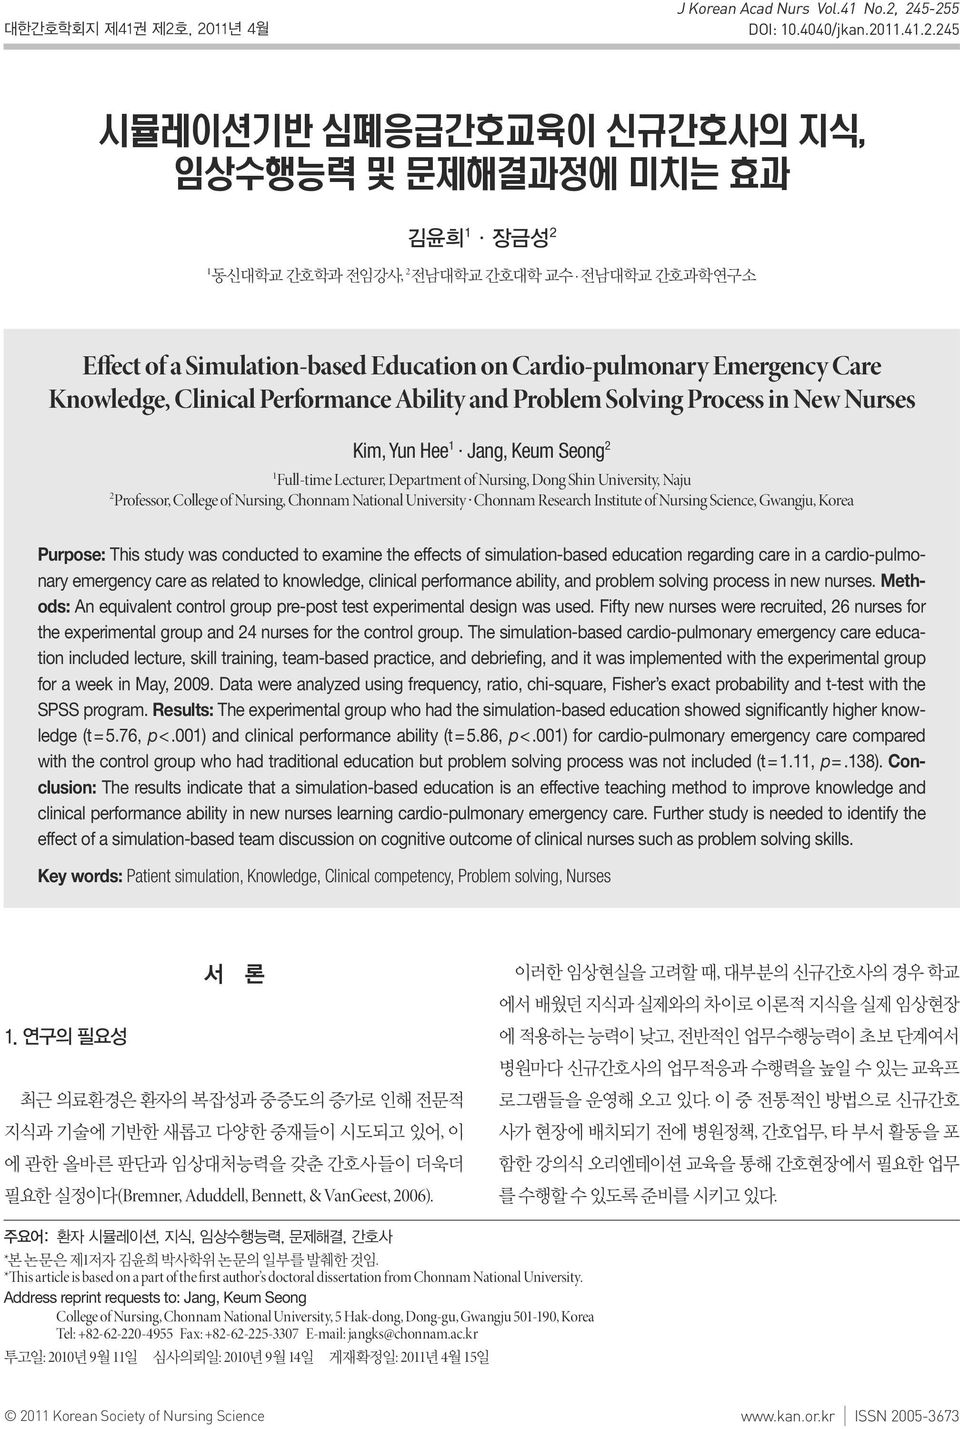 Knowledge, Clinical Performance Ability and Problem Solving Process in New Nurses Kim, Yun Hee 1 Jang, Keum Seong 2 1 Full-time Lecturer, Department of Nursing, Dong Shin University, Naju 2